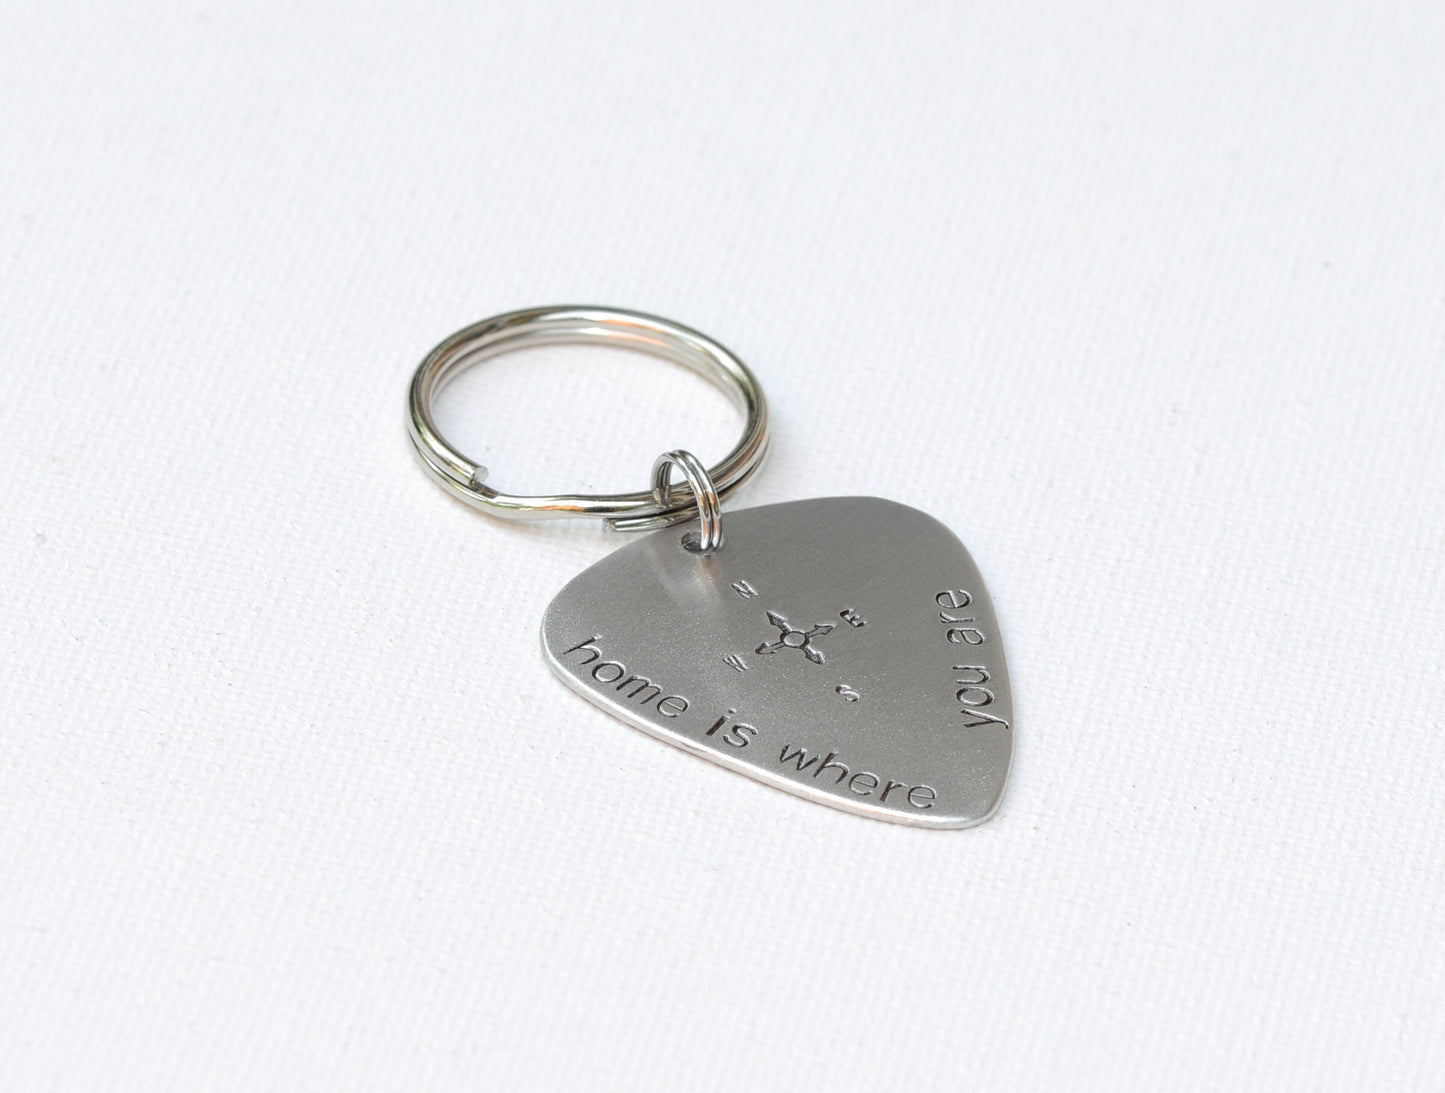 Home is where you are guitar pick keychain